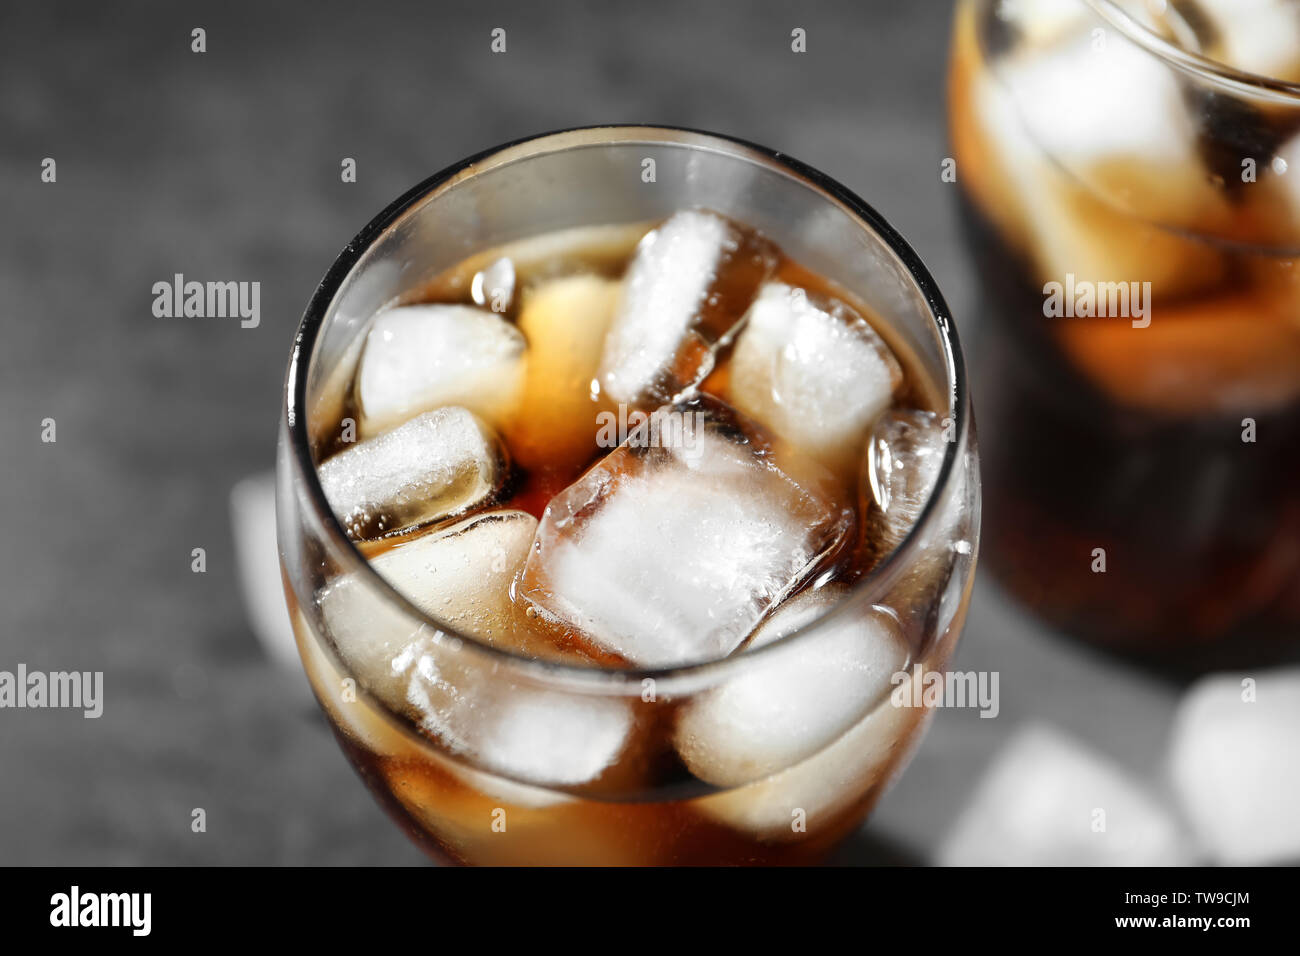 Glass cup of cola Stock Photo by ©resnick_joshua1 54232453